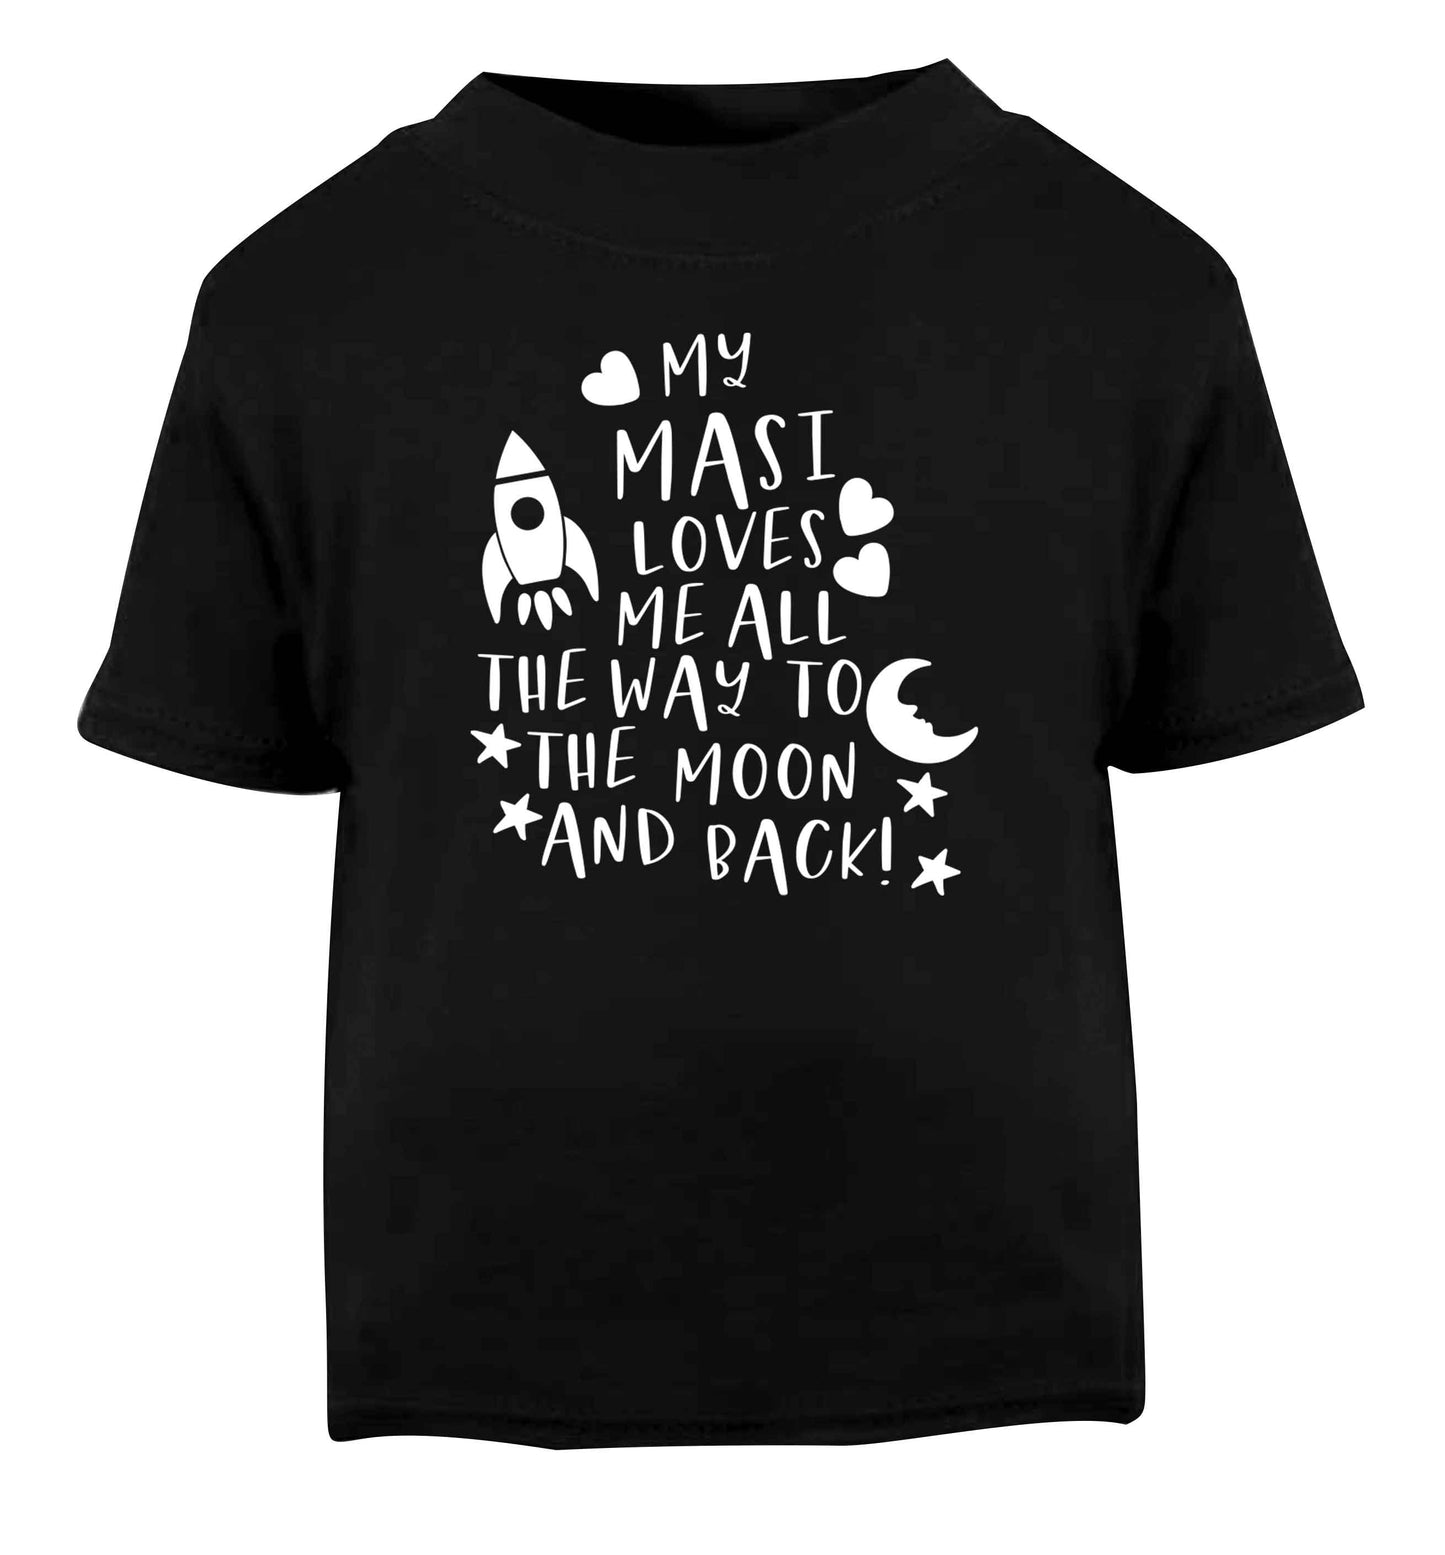 My masi loves me all the way to the moon and back Black Baby Toddler Tshirt 2 years